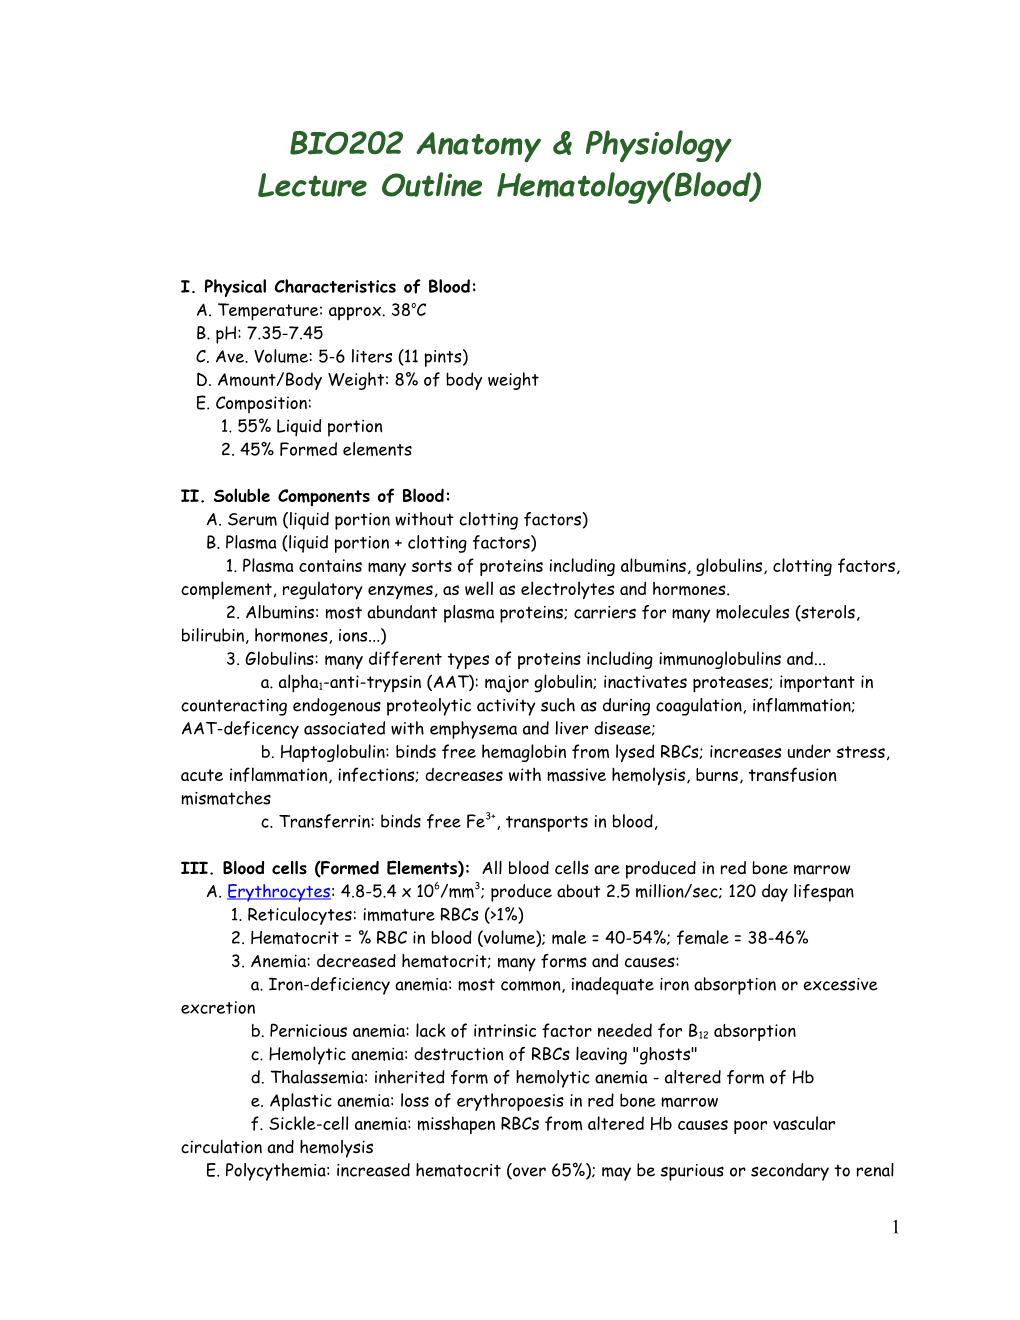 BIO202 Anatomy & Physiology Lecture Outline Hematology(Blood)